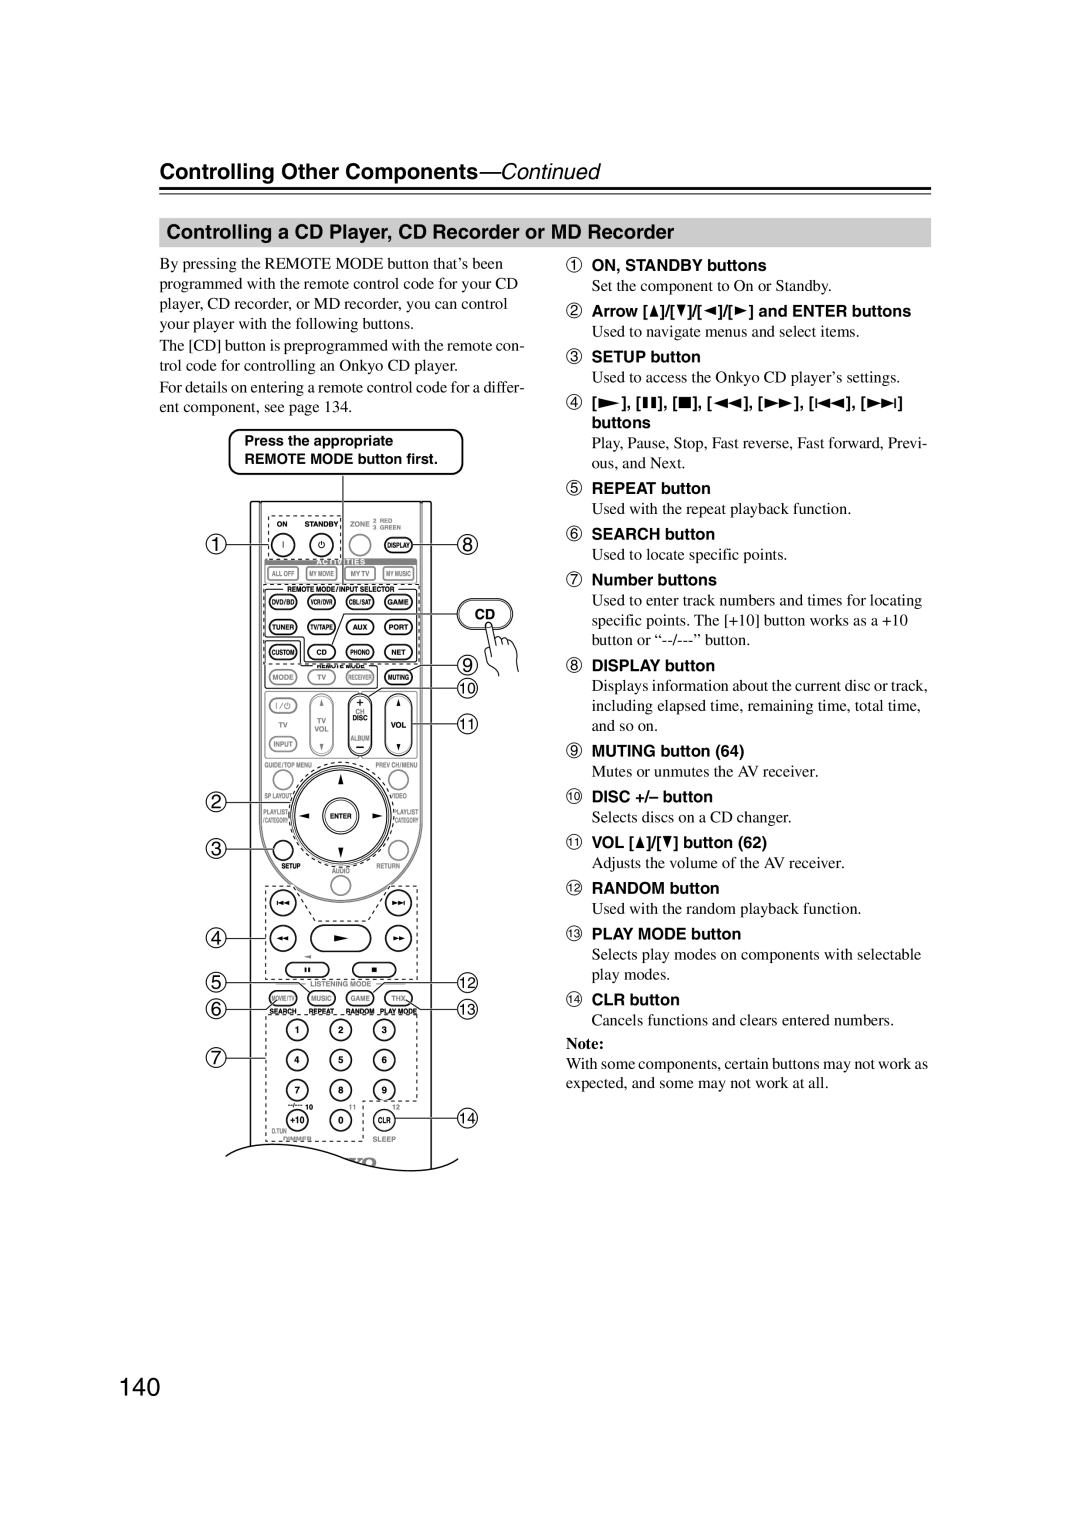 Onkyo TX-NR1007 instruction manual ah i j k b c d, Controlling Other Components—Continued 